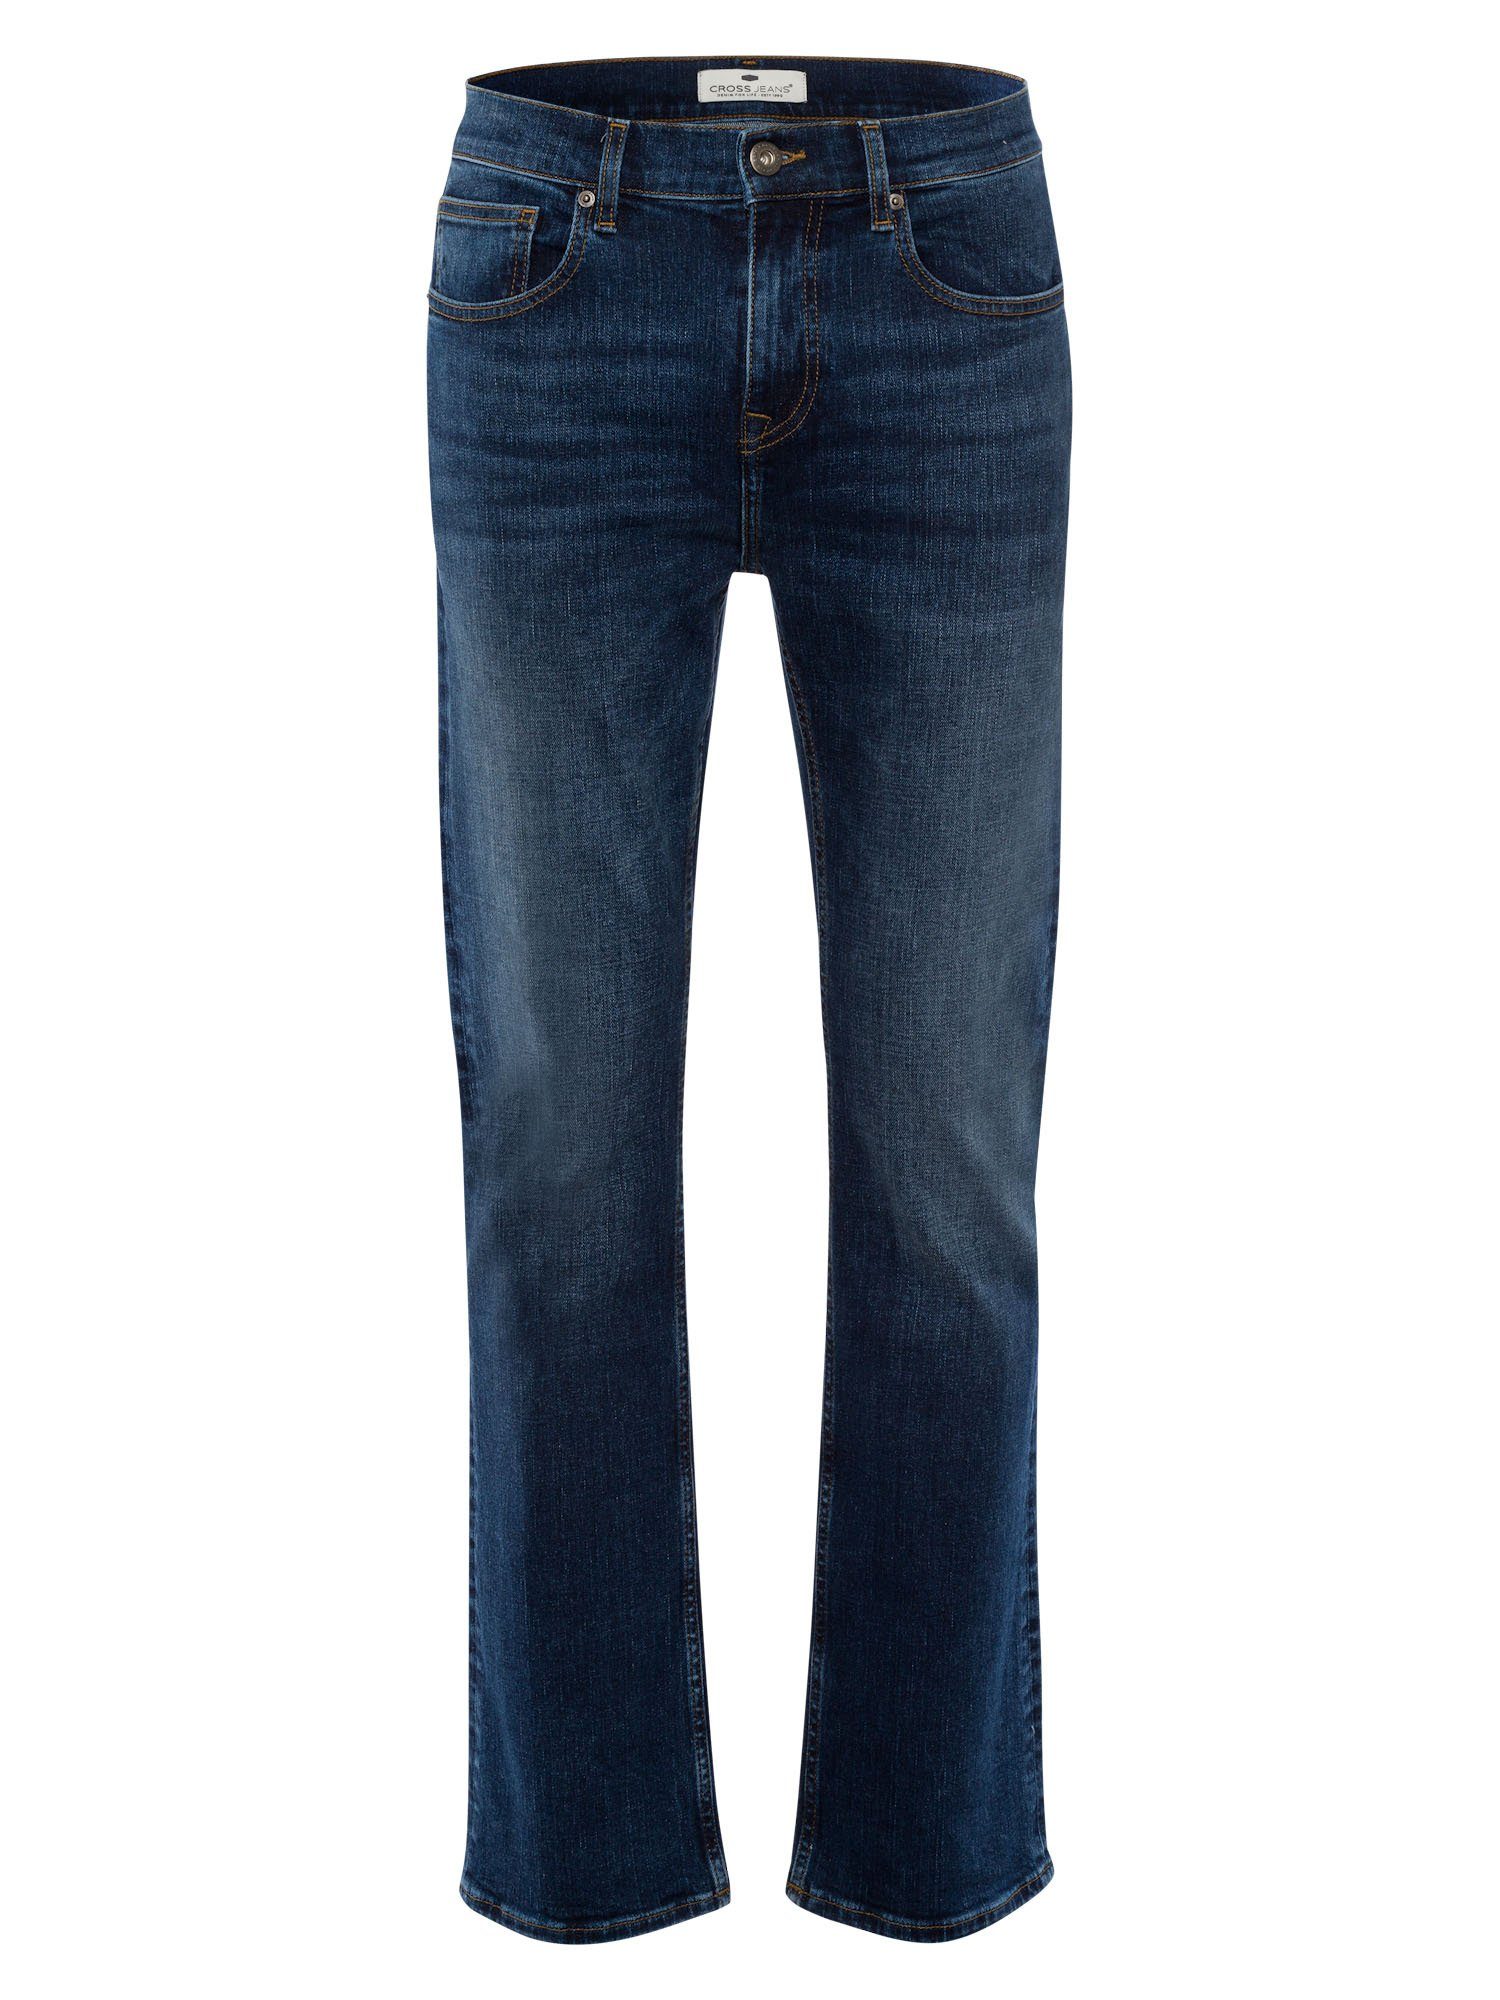 CROSS JEANS® Bootcut-Jeans Colin